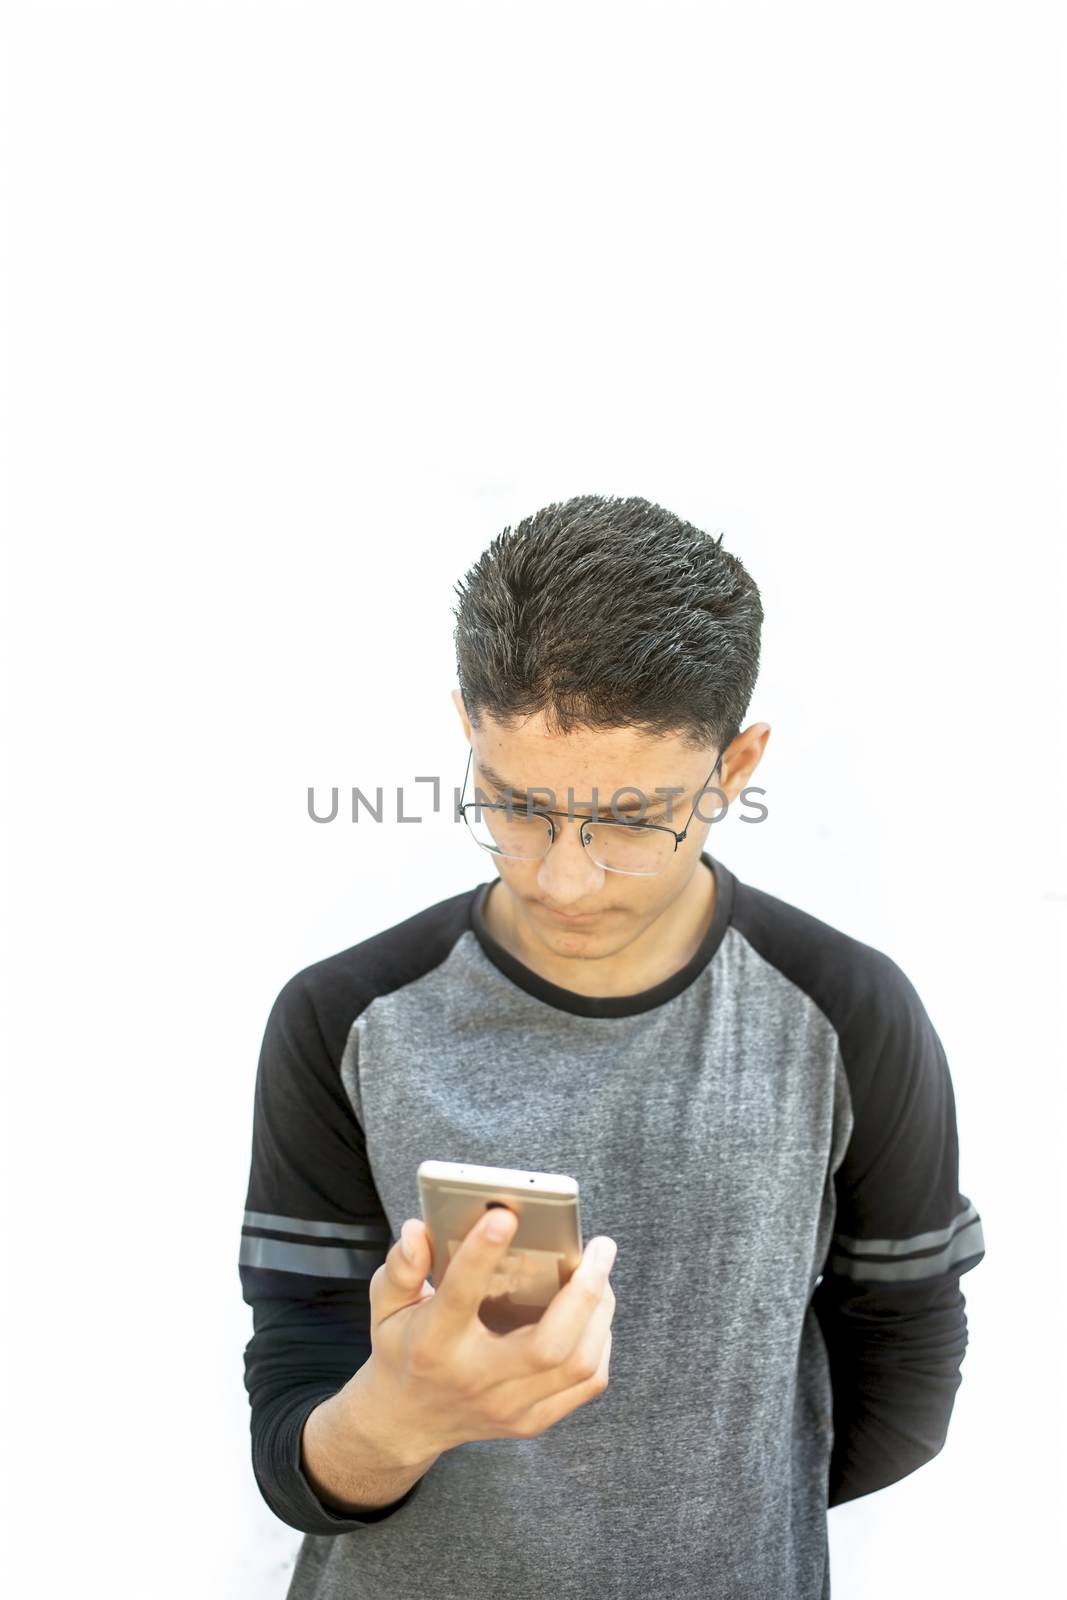 Portrait shot of young teenager wearing black colored t-shirt and using cell phone and posing or expressing various expressions on his face isolated on white. by mirzamlk